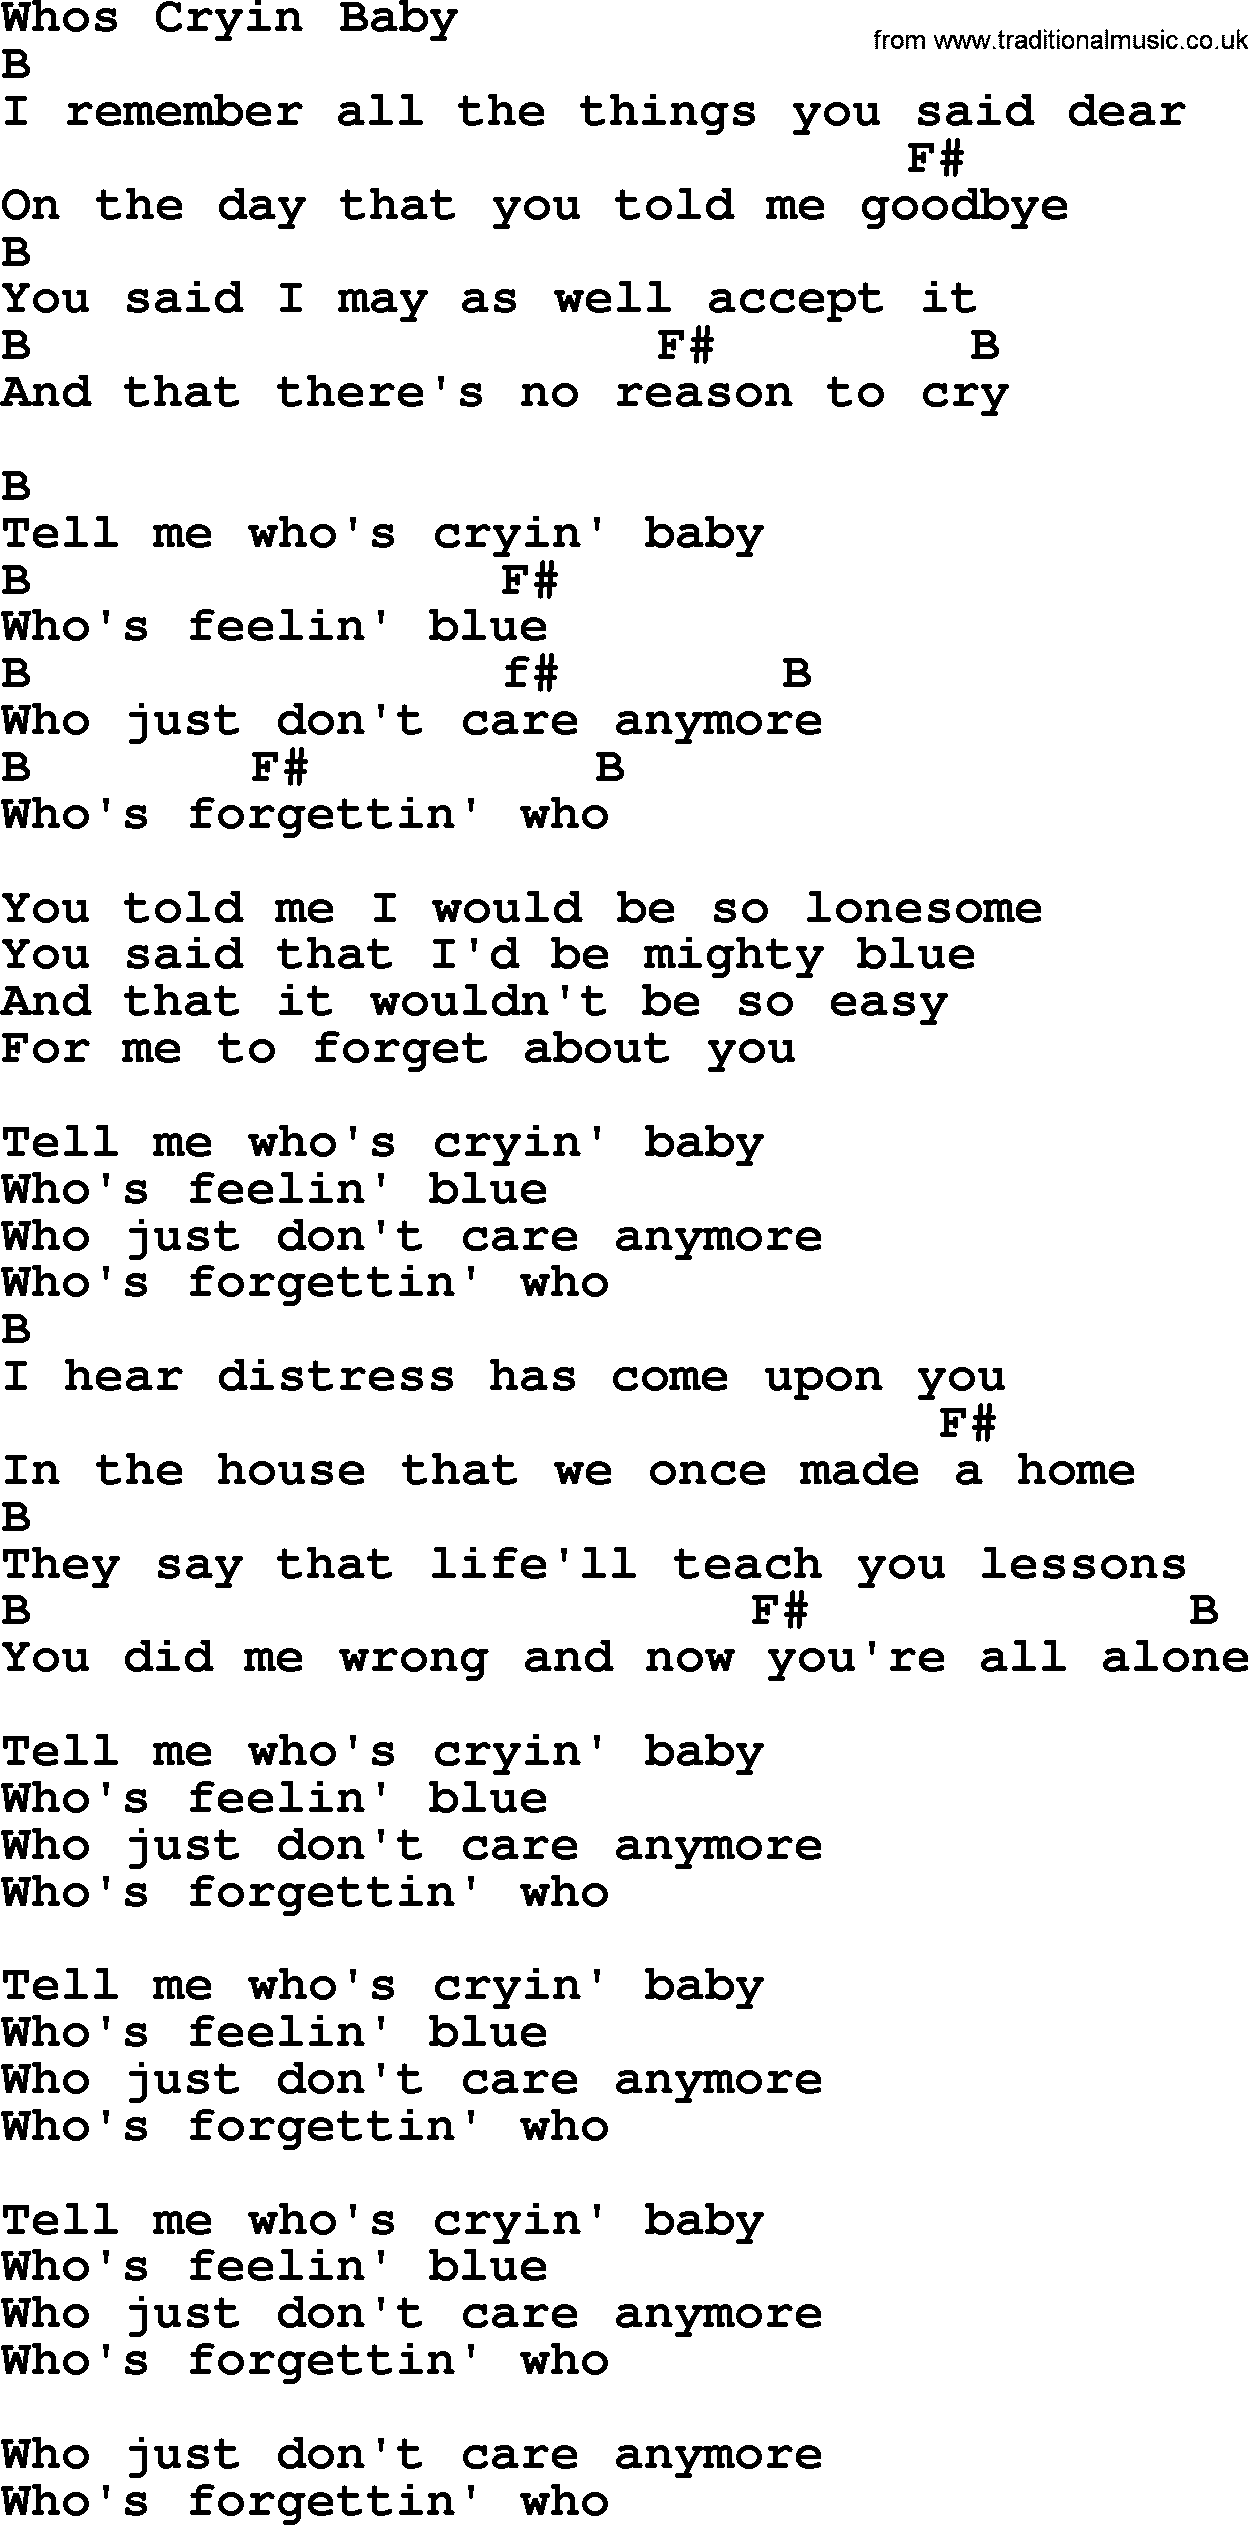 Bluegrass song: Whos Cryin Baby, lyrics and chords